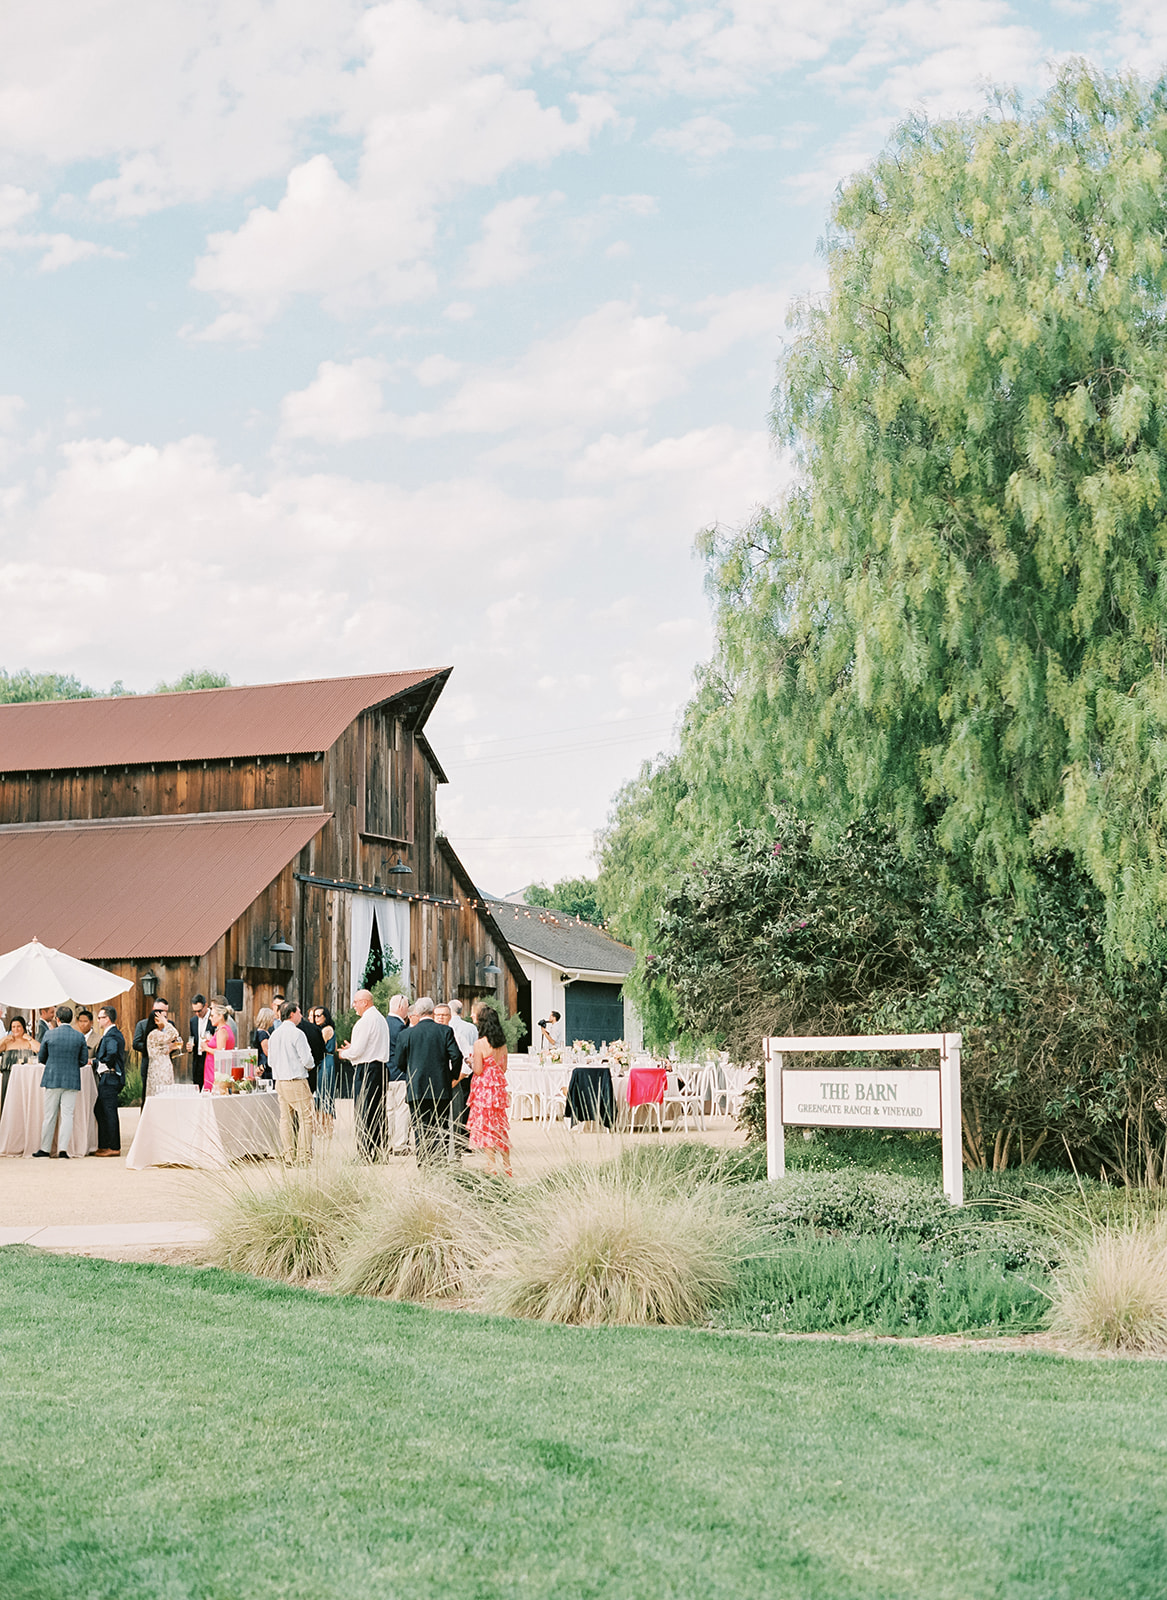 Greengate Ranch: A Perfect Wedding Venue for Your Dream Day